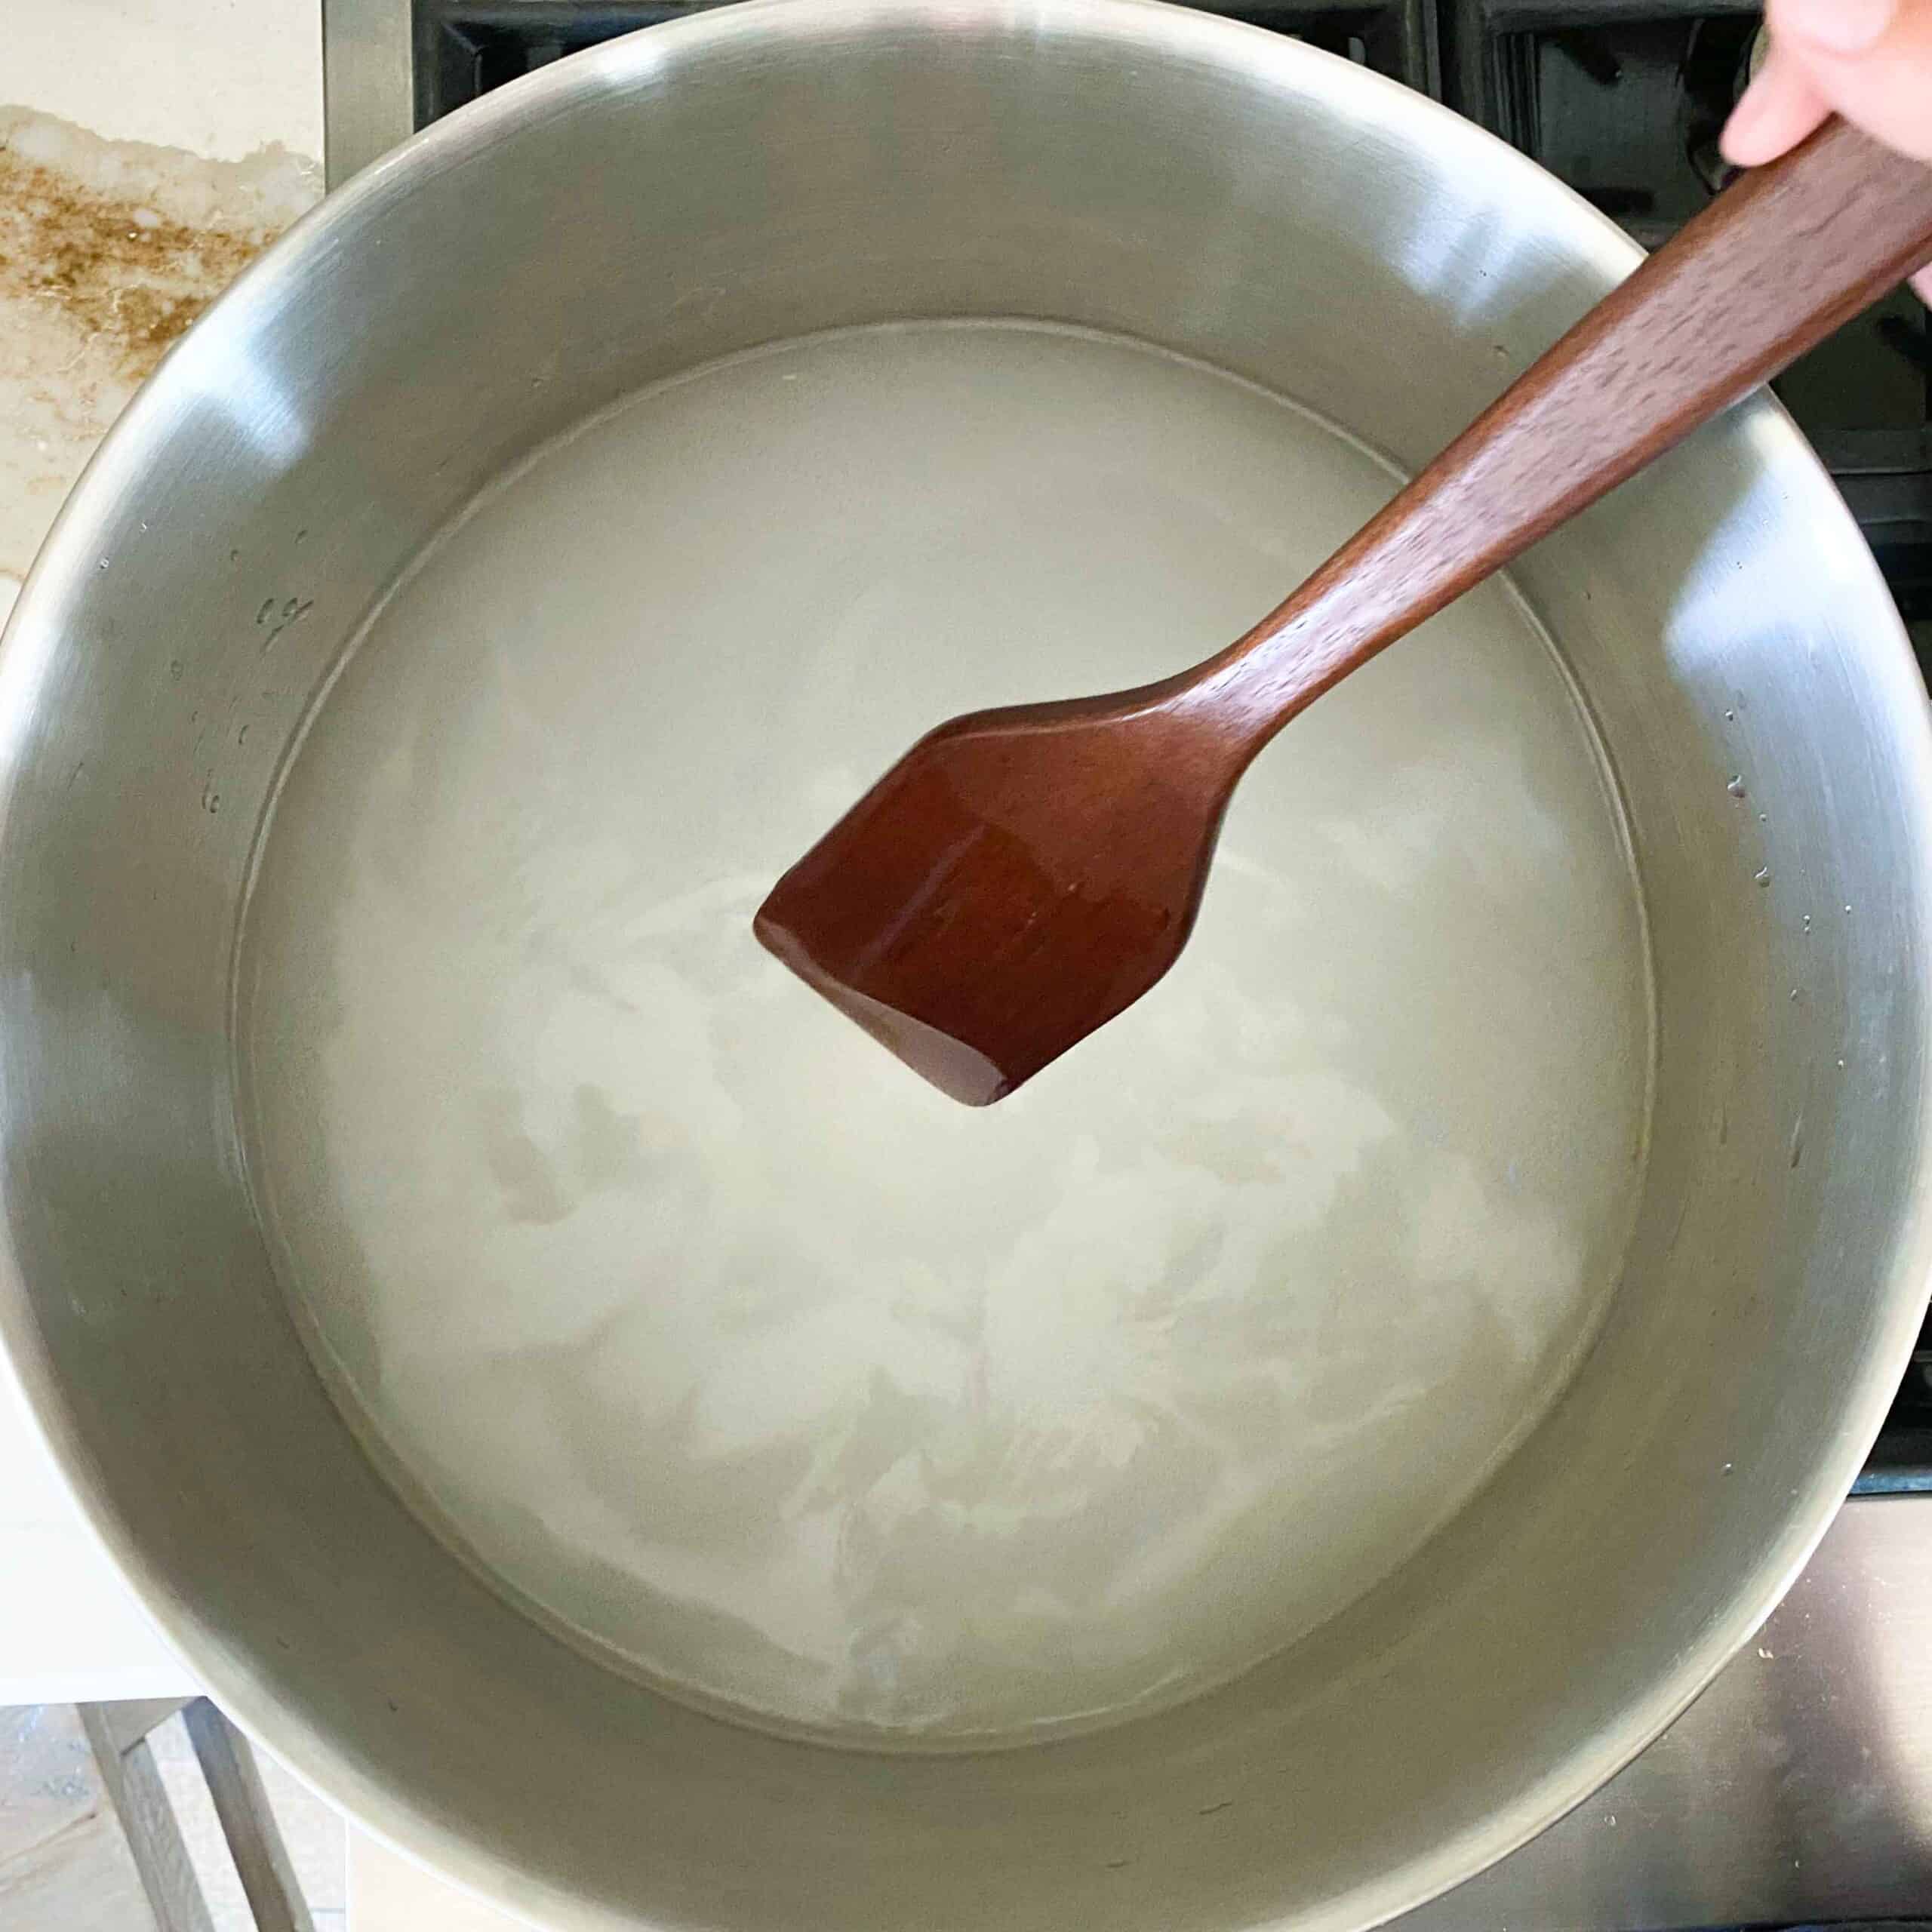 Wooden spatula stirring a large pot of brine for fermented dill pickles.